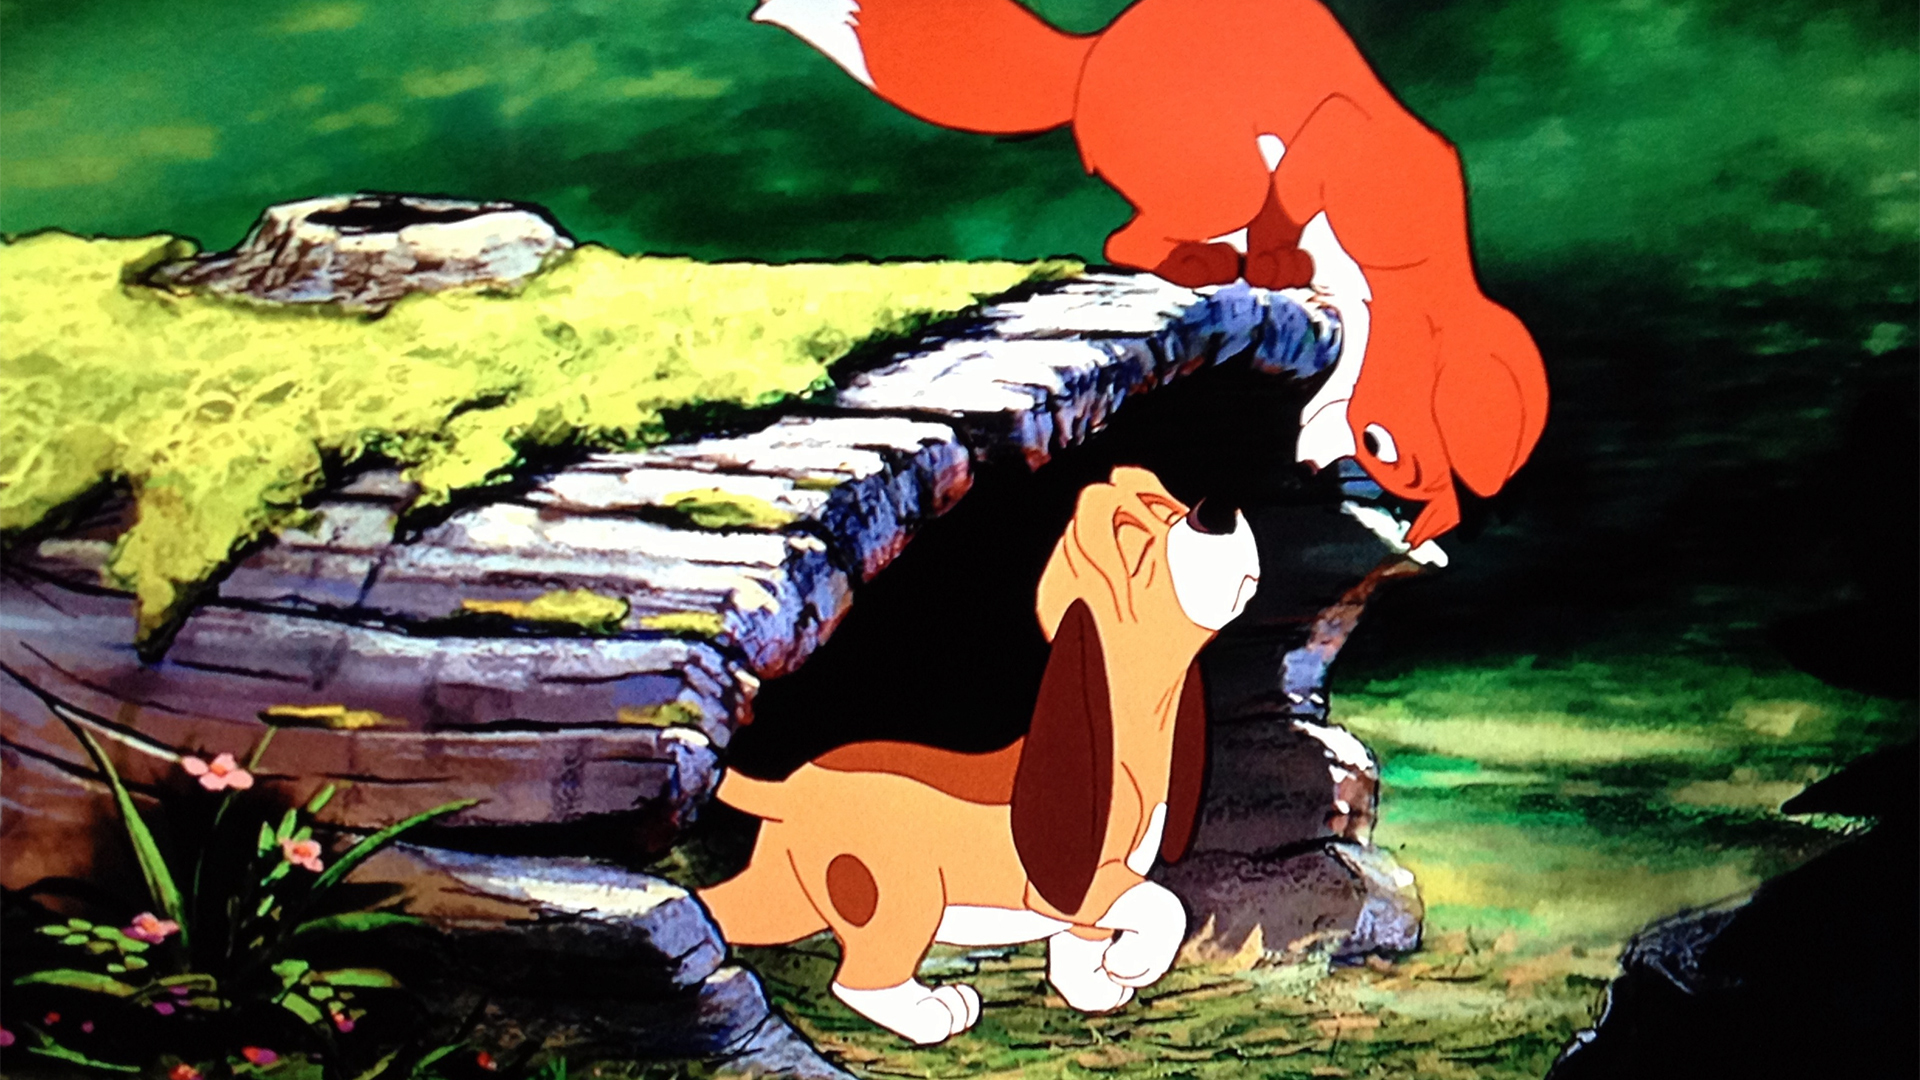 <p>1981’s “The Fox and the Hound” is about an unlikely friendship between two very different personalities. It’s also about a fox and a hound, voiced by Mickey Rooney and Kurt Russell, respectively. This thoughtful animated Disney film might not be atop most Disney fans’ lists of their favorite movies from the studio, but the classic cartoon still earns a spot on this list.</p><p><a href='https://www.msn.com/en-us/community/channel/vid-cj9pqbr0vn9in2b6ddcd8sfgpfq6x6utp44fssrv6mc2gtybw0us'>Follow us on MSN to see more of our exclusive entertainment content.</a></p>